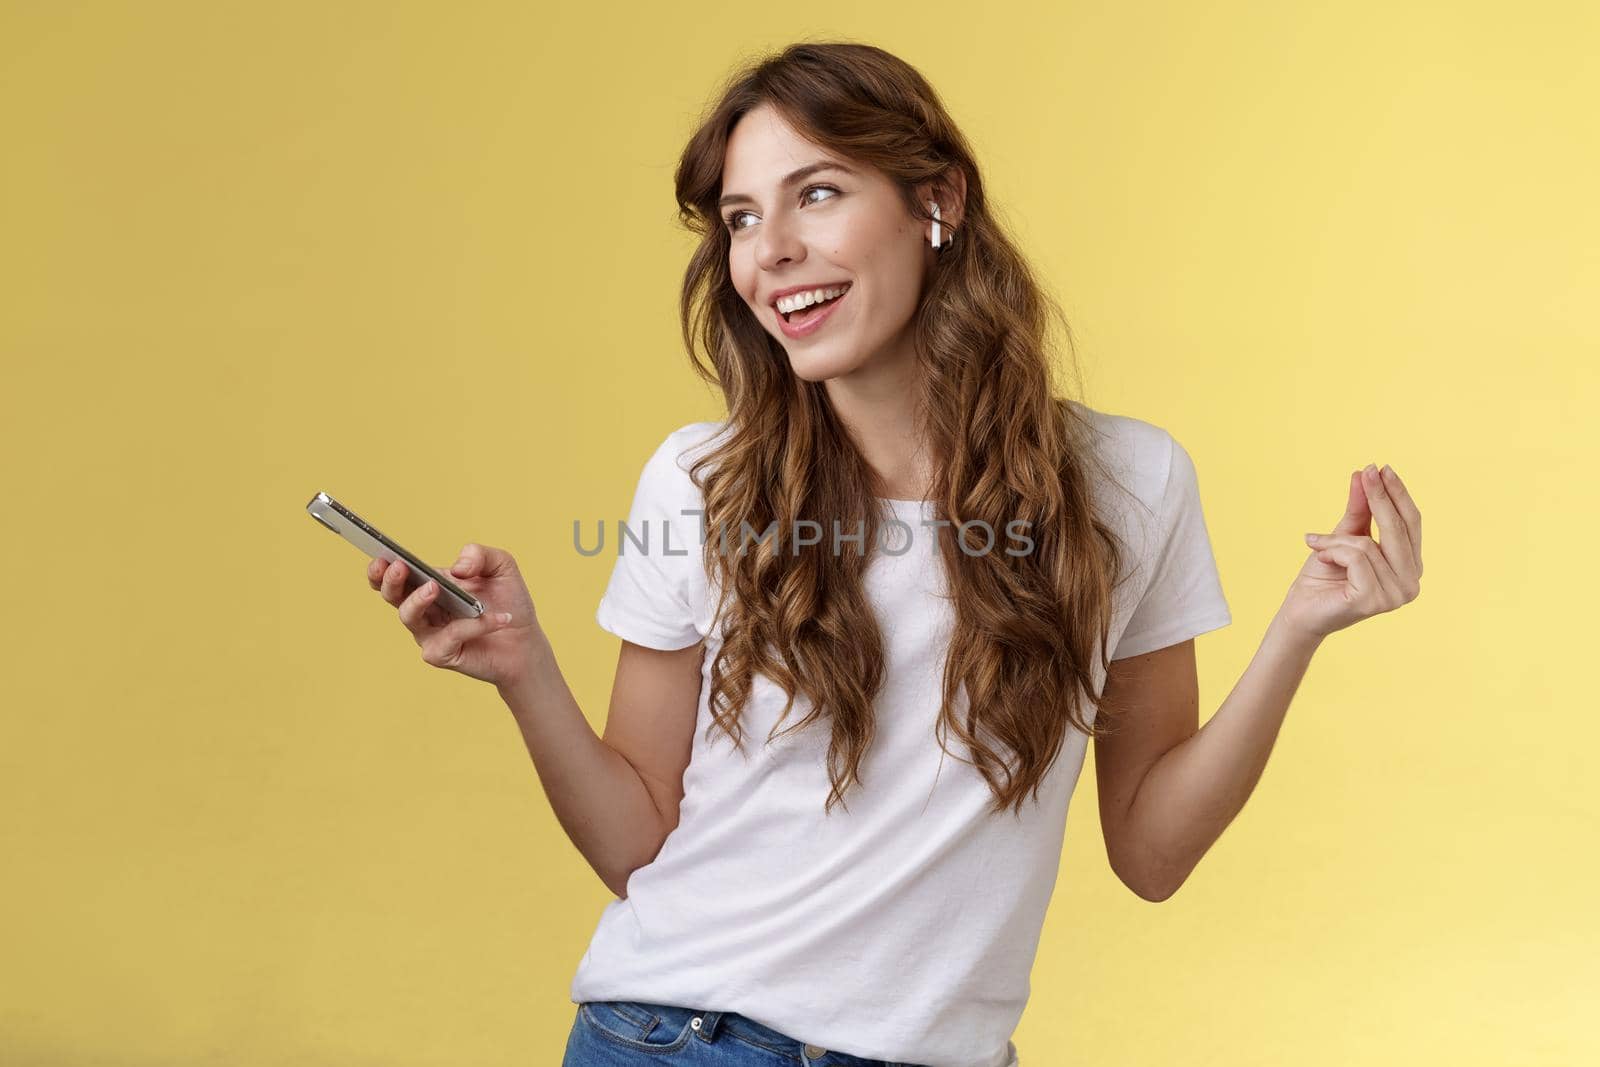 Girl enjoying music listening song wireless earbuds dancing lively carefree look away smiling broadly hold smartphone found new track partying alone soundtrack favorite movie yellow background by Benzoix